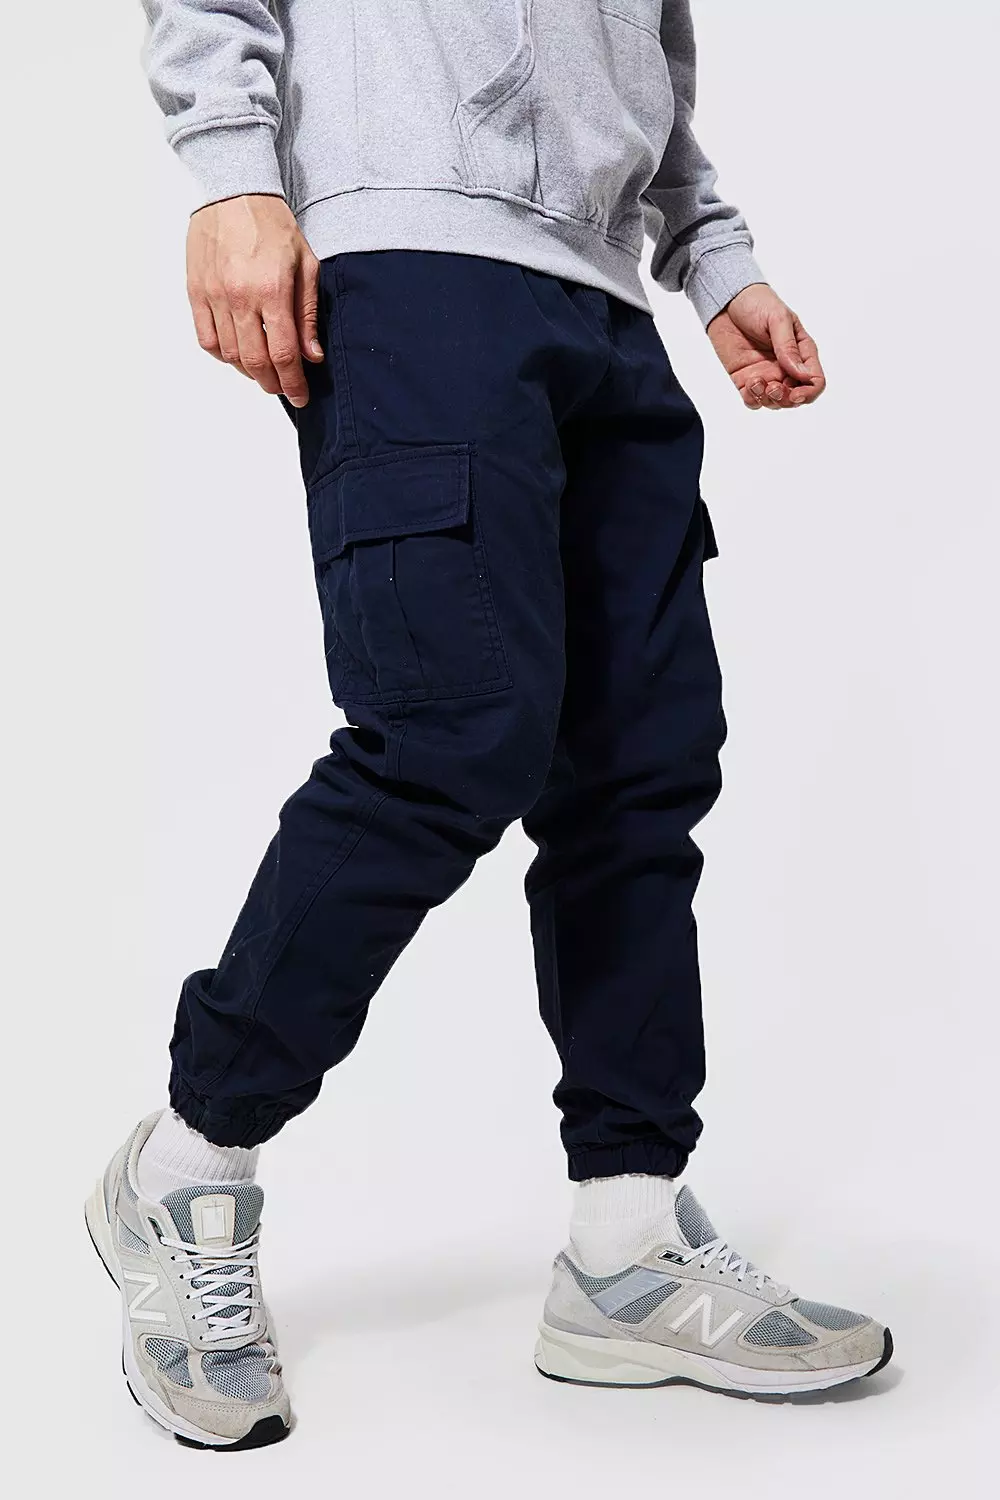 YYDGH Men's Jeans Slim Stretch Straight Leg Jean Elastic Waist Zip up Pant  Casual Classic Fit Trousers with Pockets 